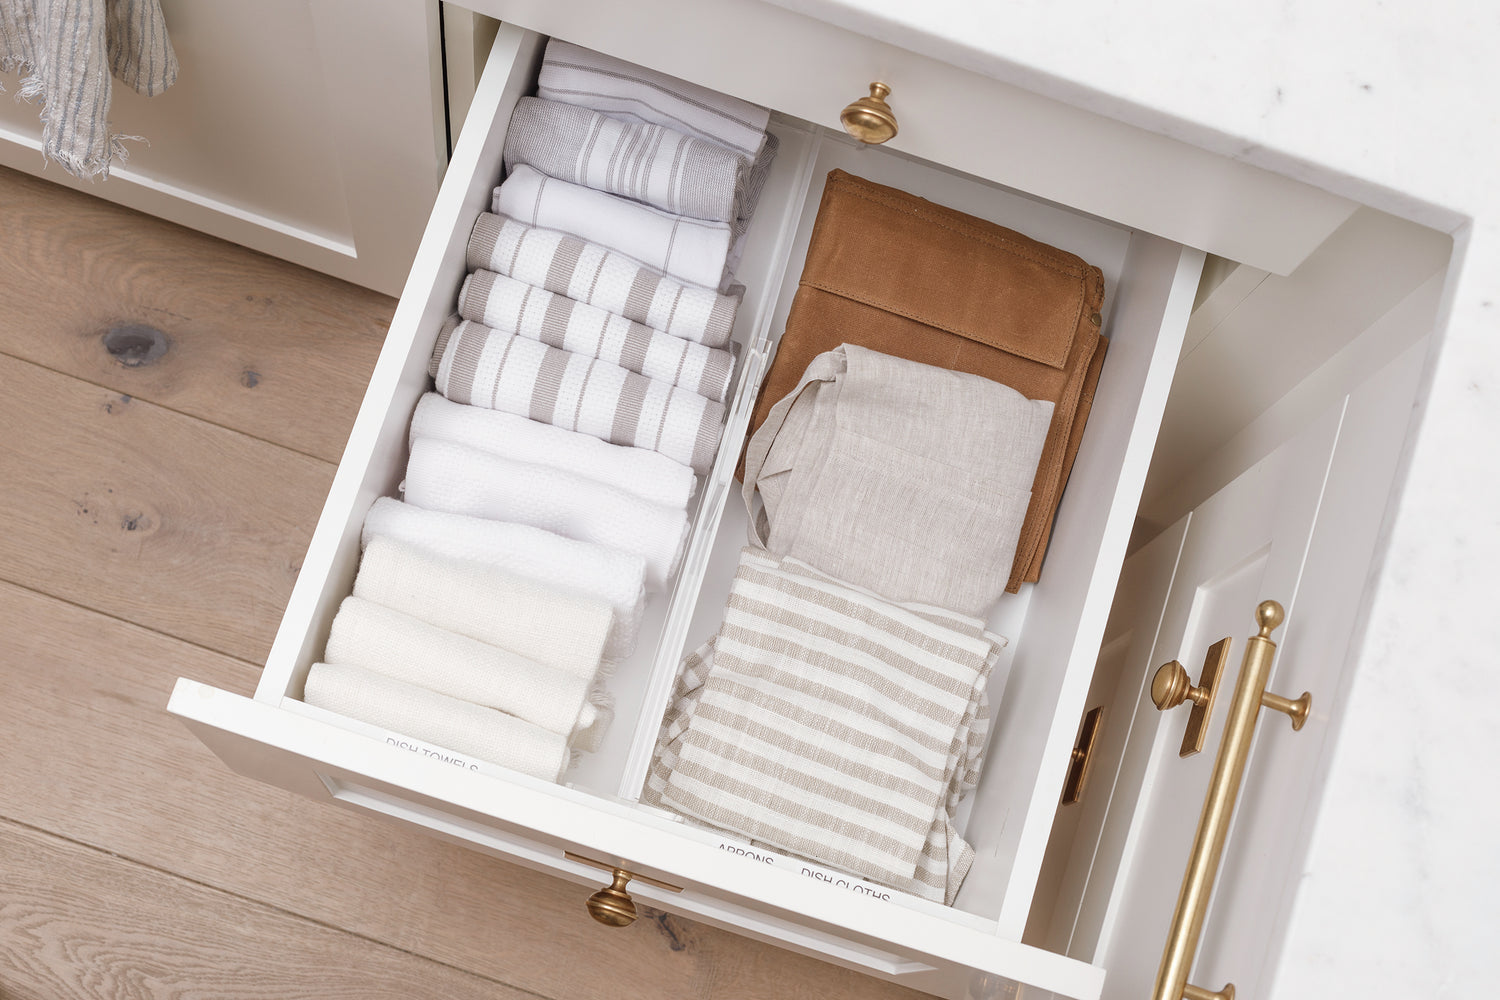 Linen drawer containing towels, aprons, and dishcloths separated by an Acrylic Drawer Divider.